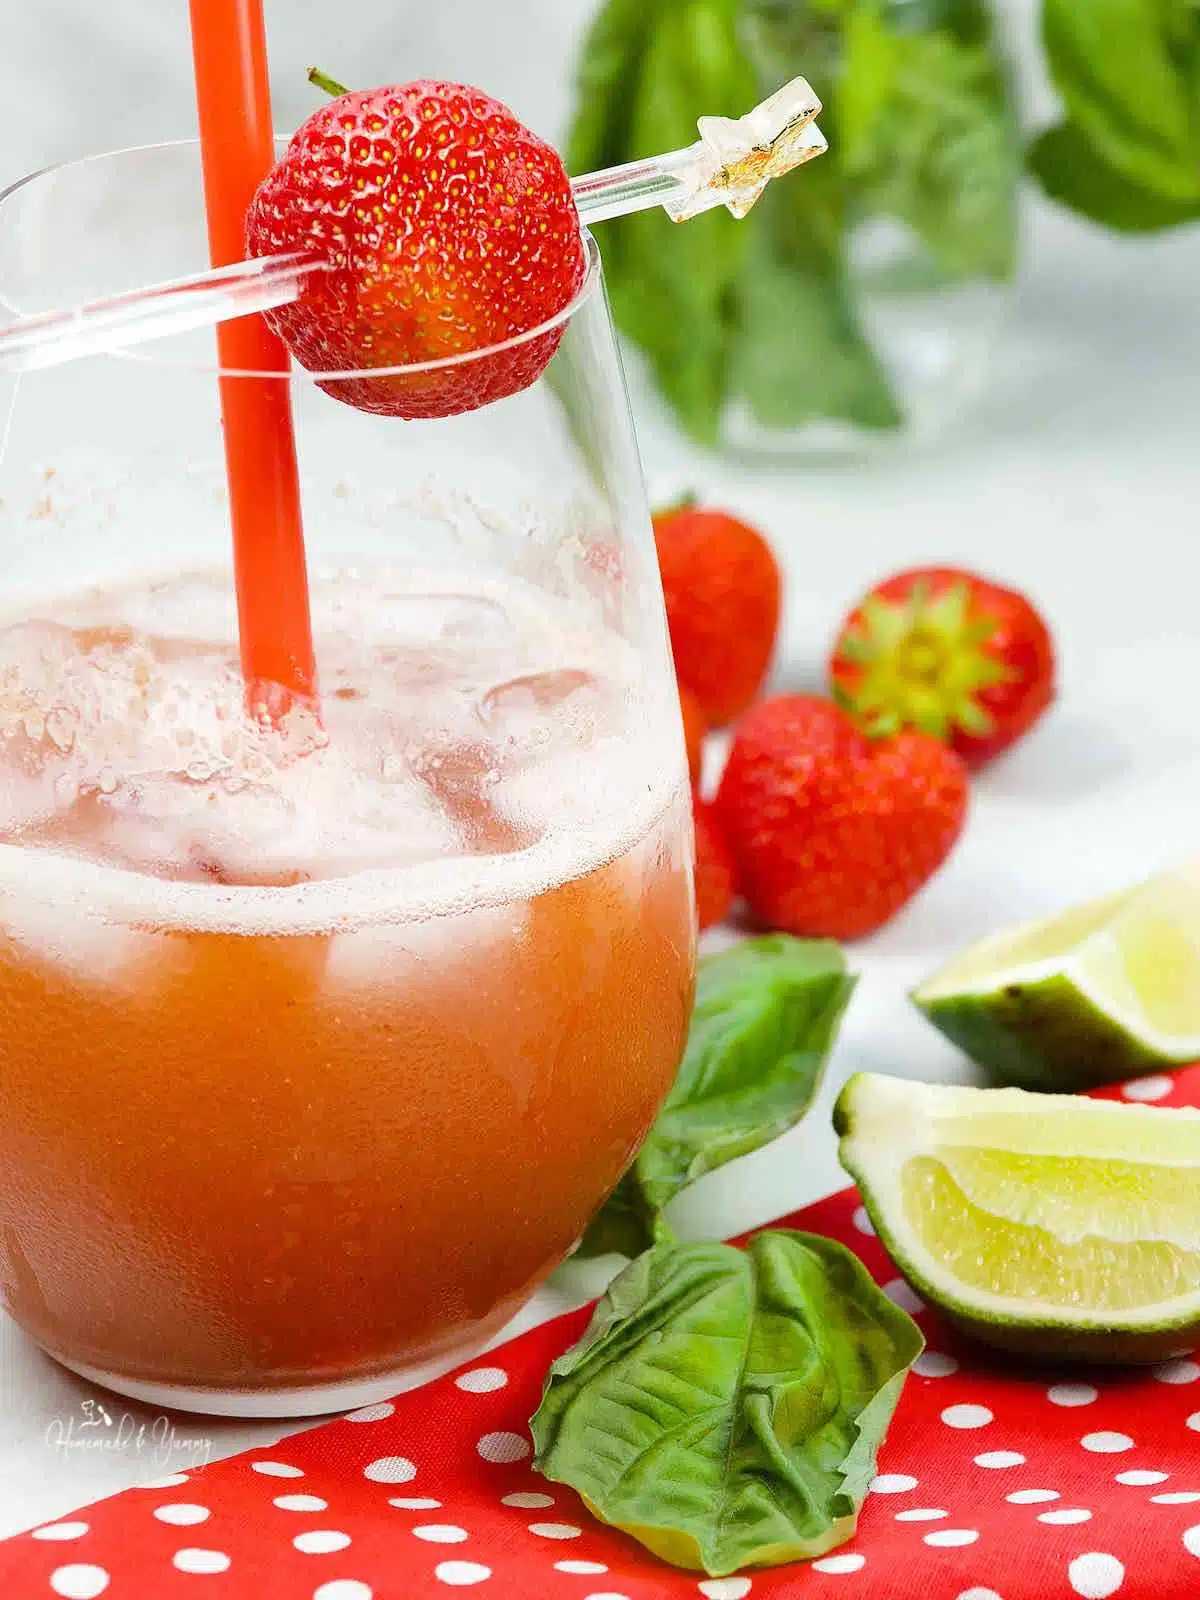 Summer cocktail with strawberries, basil and tequila.